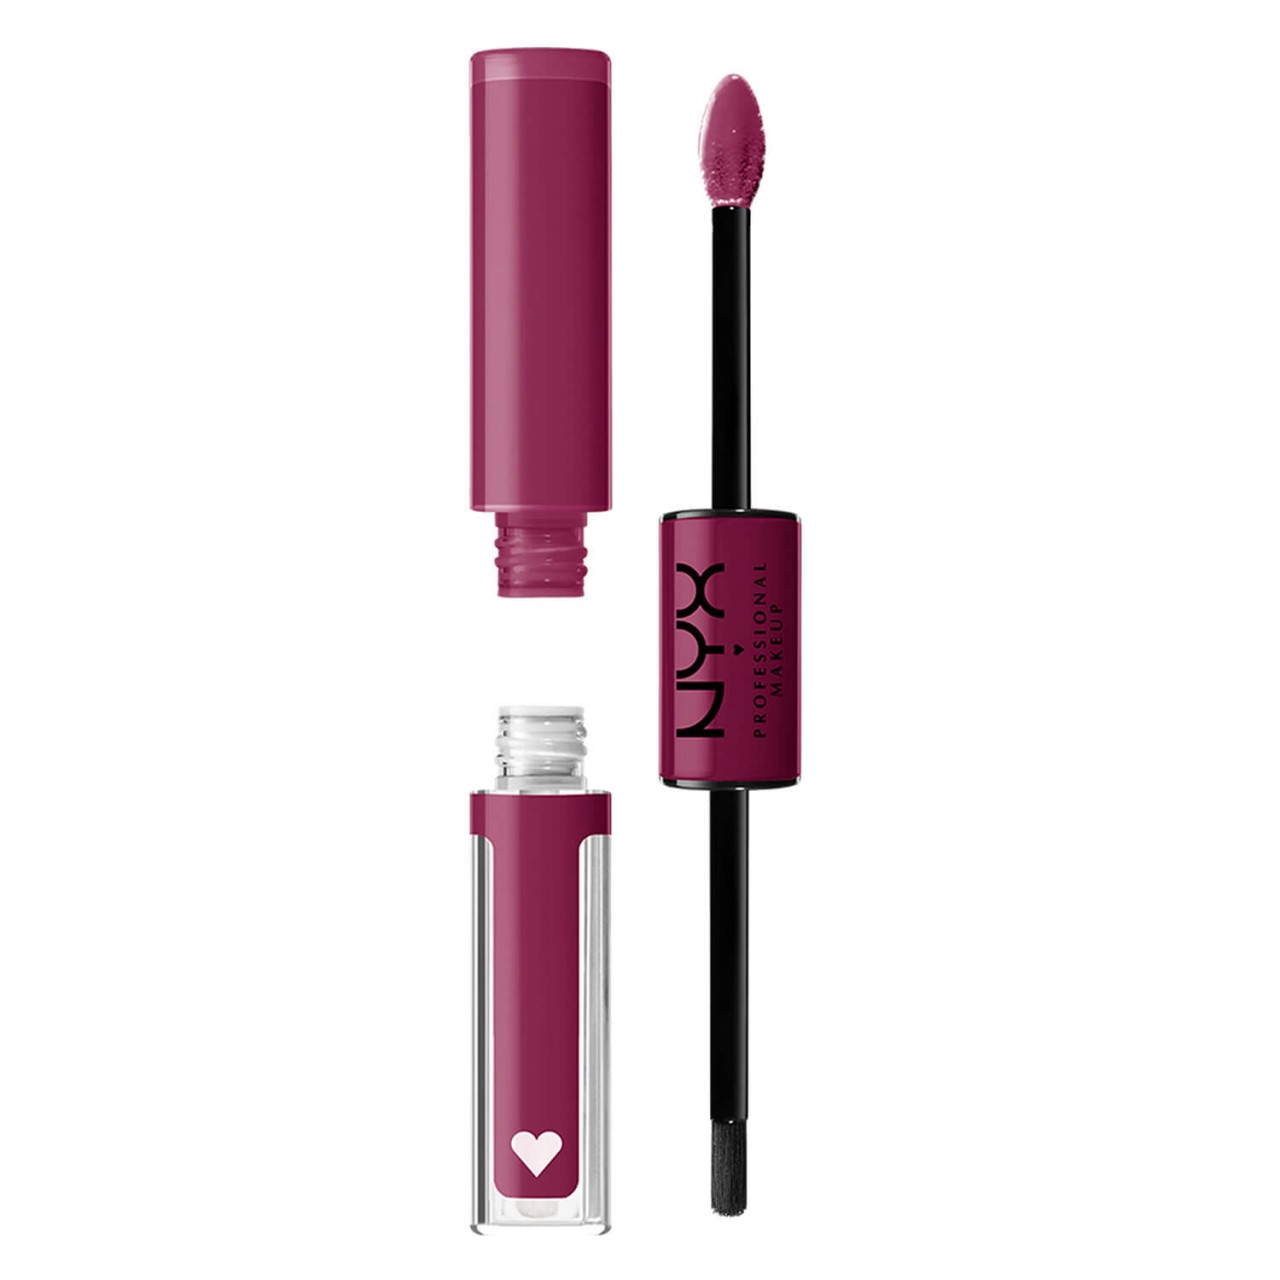 Shine Loud - High Pigment Lip Shine In Charge von NYX Professional Makeup